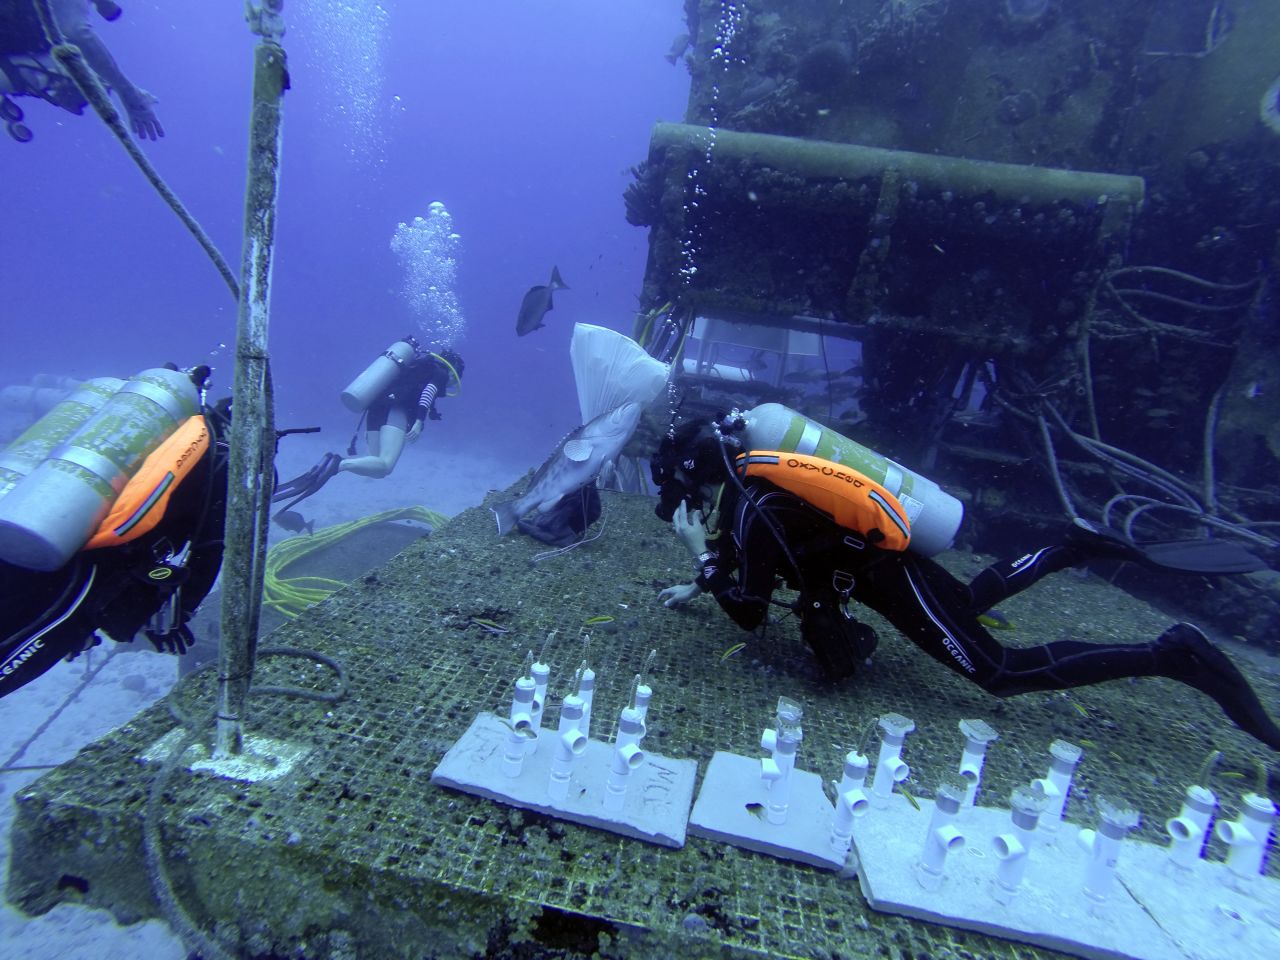 During his stay Cousteau plans to study how climate change is affecting the ocean's acidity and marine life. Here, two researchers (they like the term "aquanauts") prepare science experiments outside Aquarius.